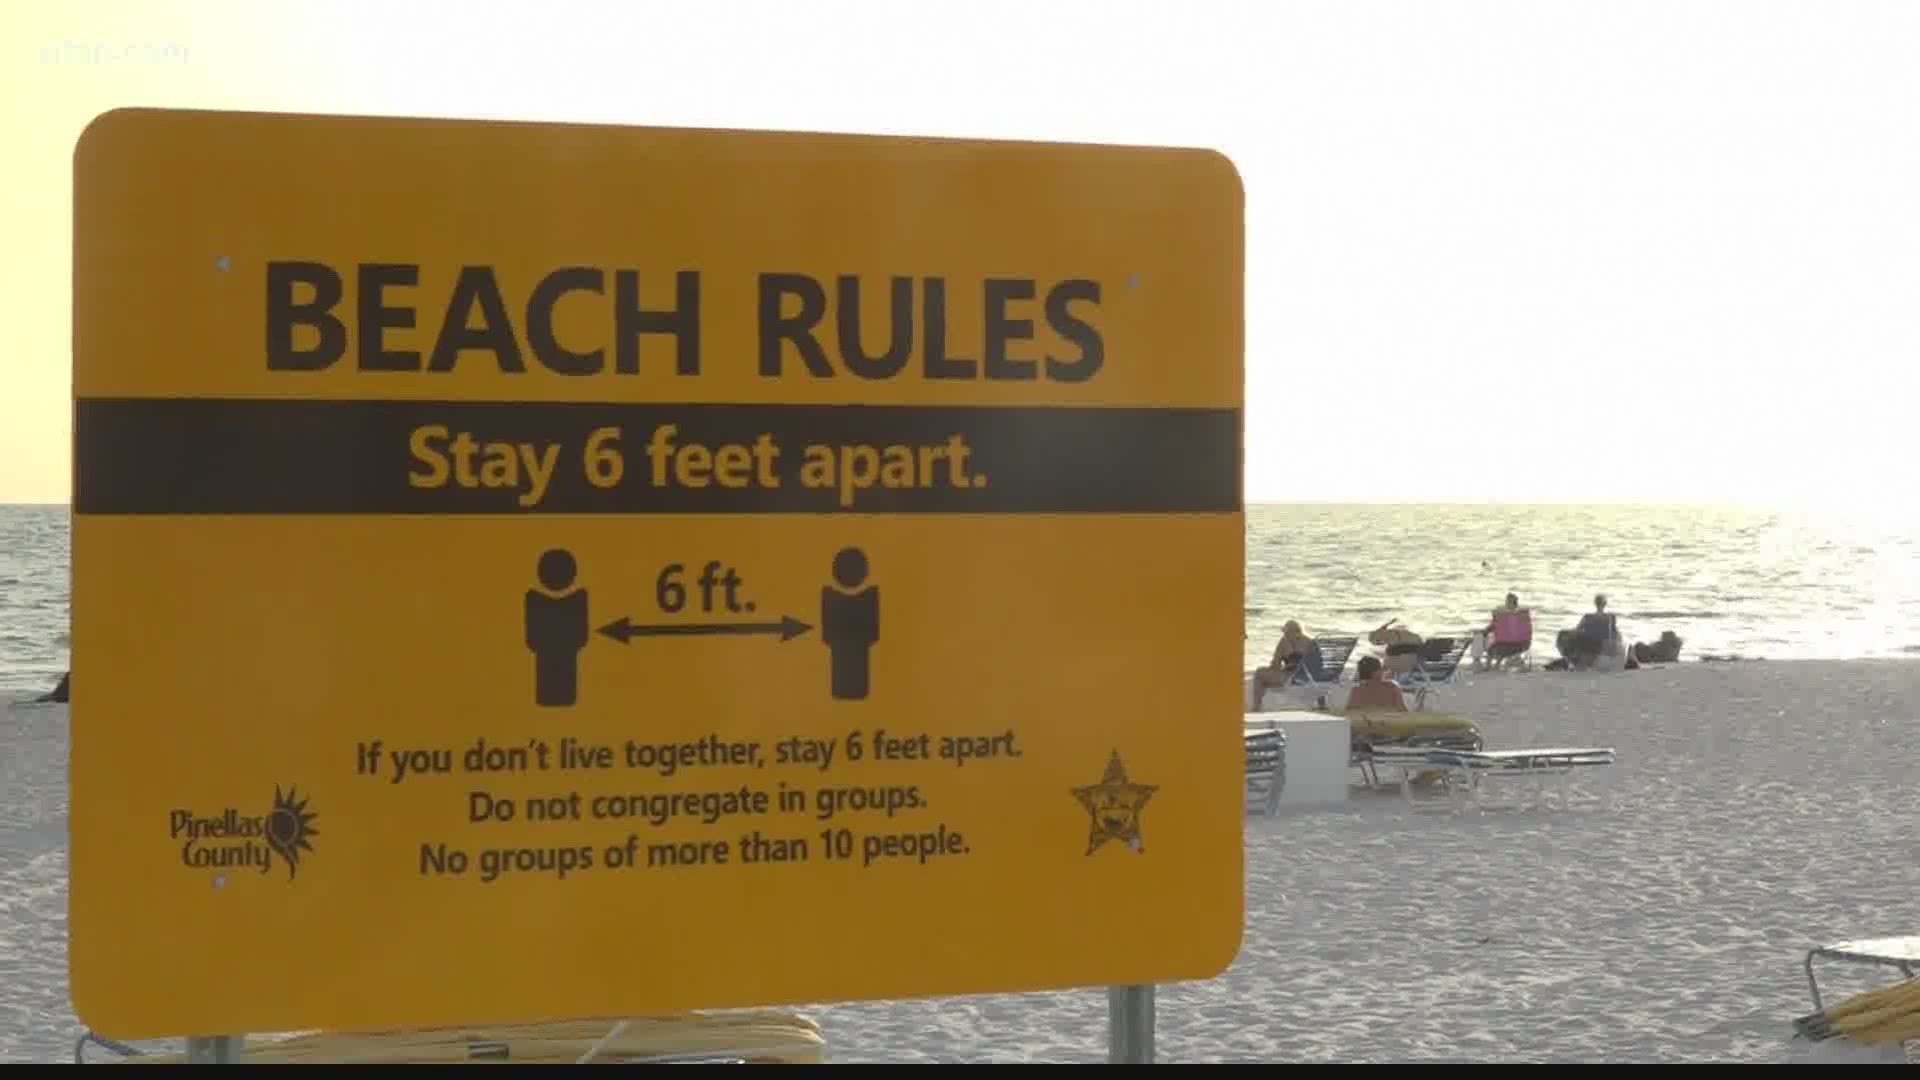 With Tampa Bay beaches remaining open, doctors say people need to be vigilant about social distancing.